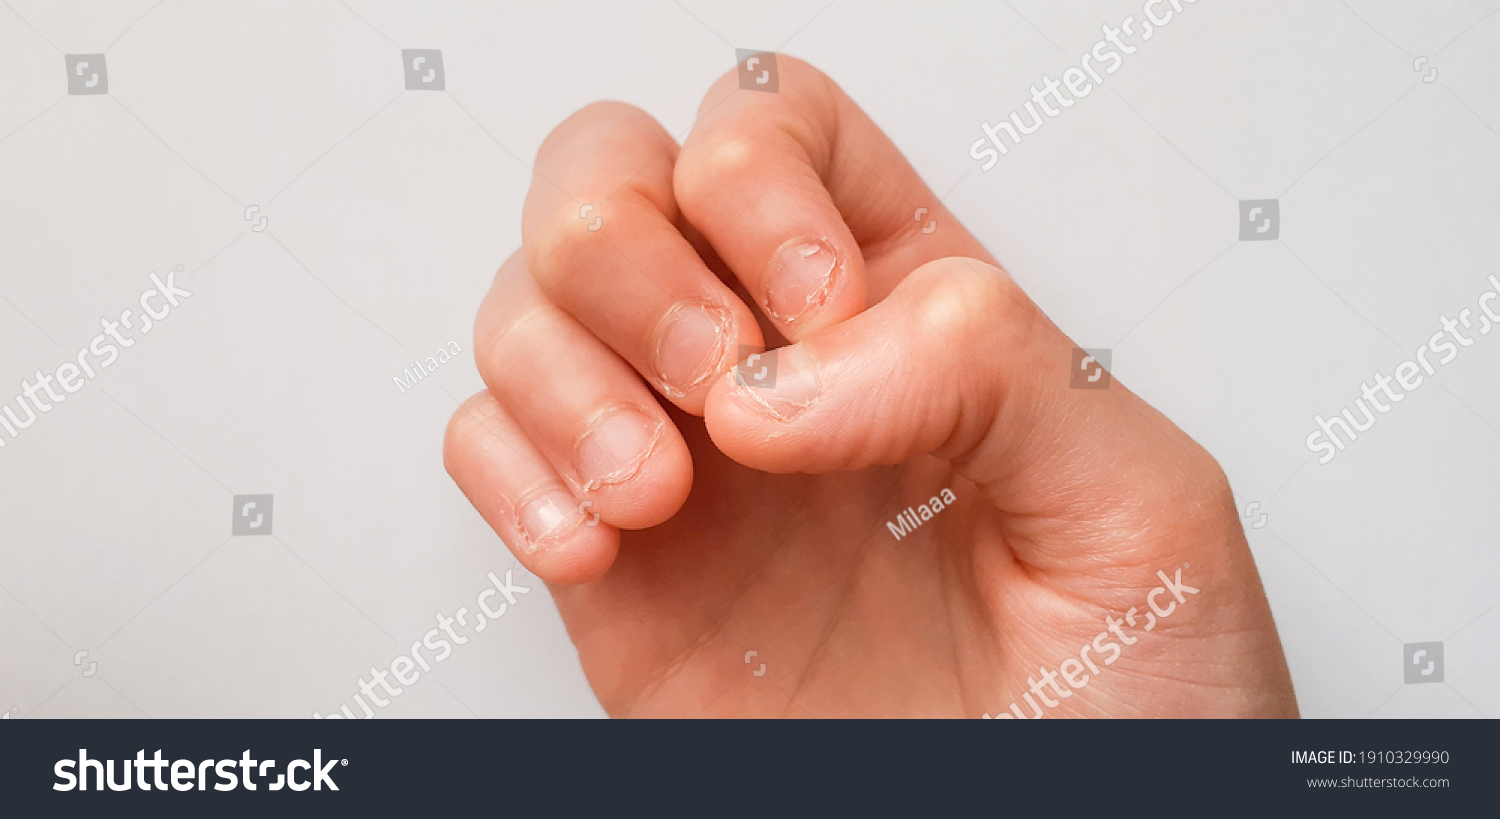 boys hand with chewed fingernails on white background - kids hand with short fingernails #1910329990